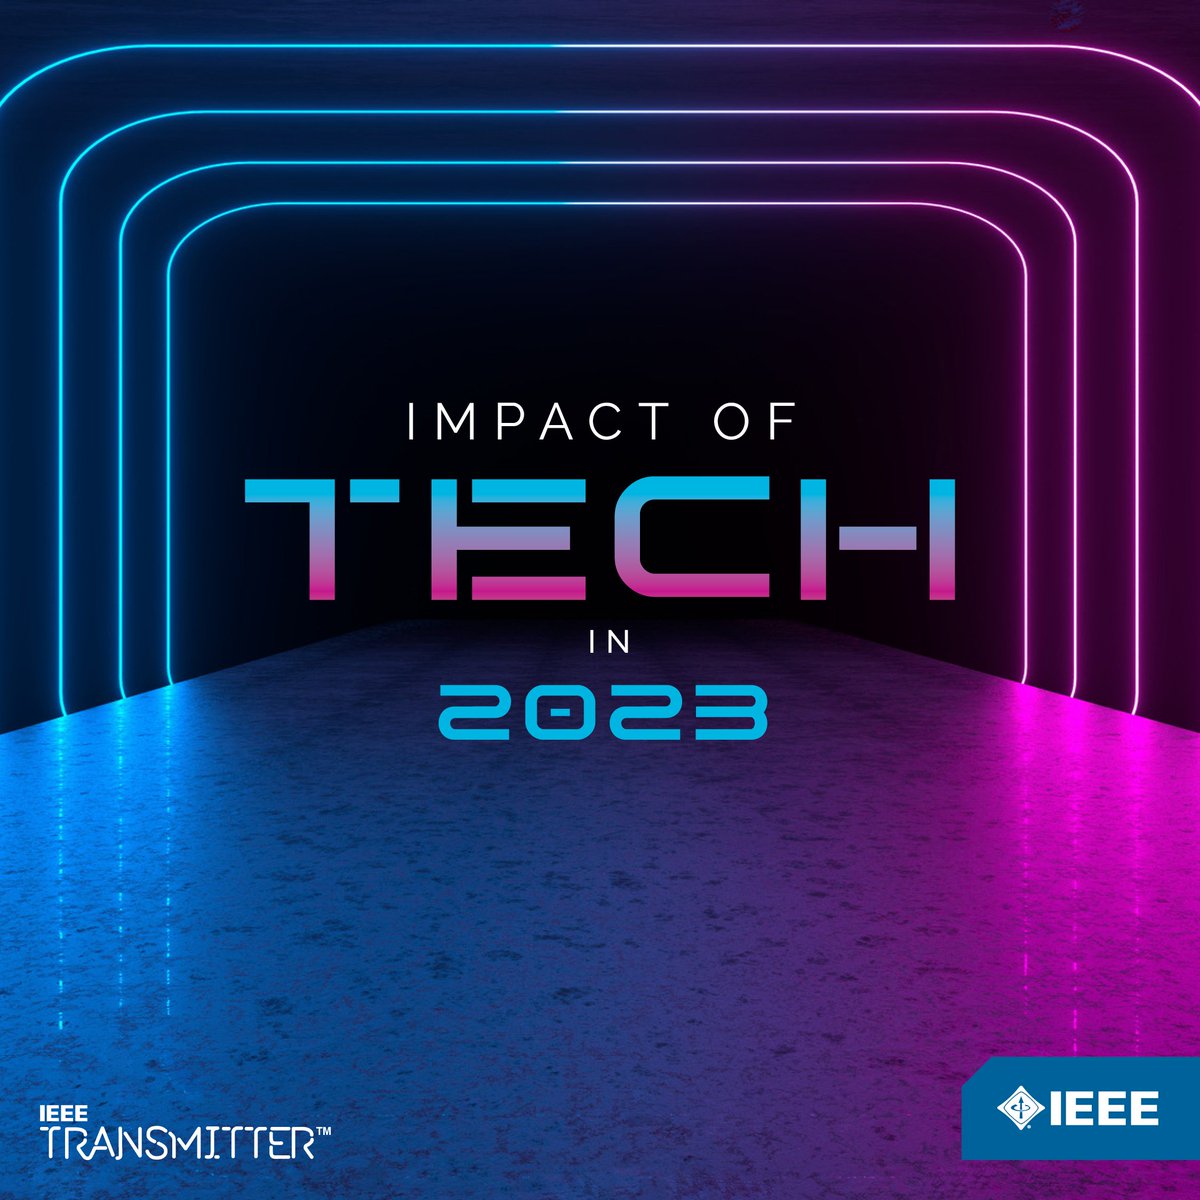 How will advances in technology shape the world in 2023? #IEEE Impact Creators weigh in with their predictions on IEEE Transmitter: bit.ly/3DcdeSP